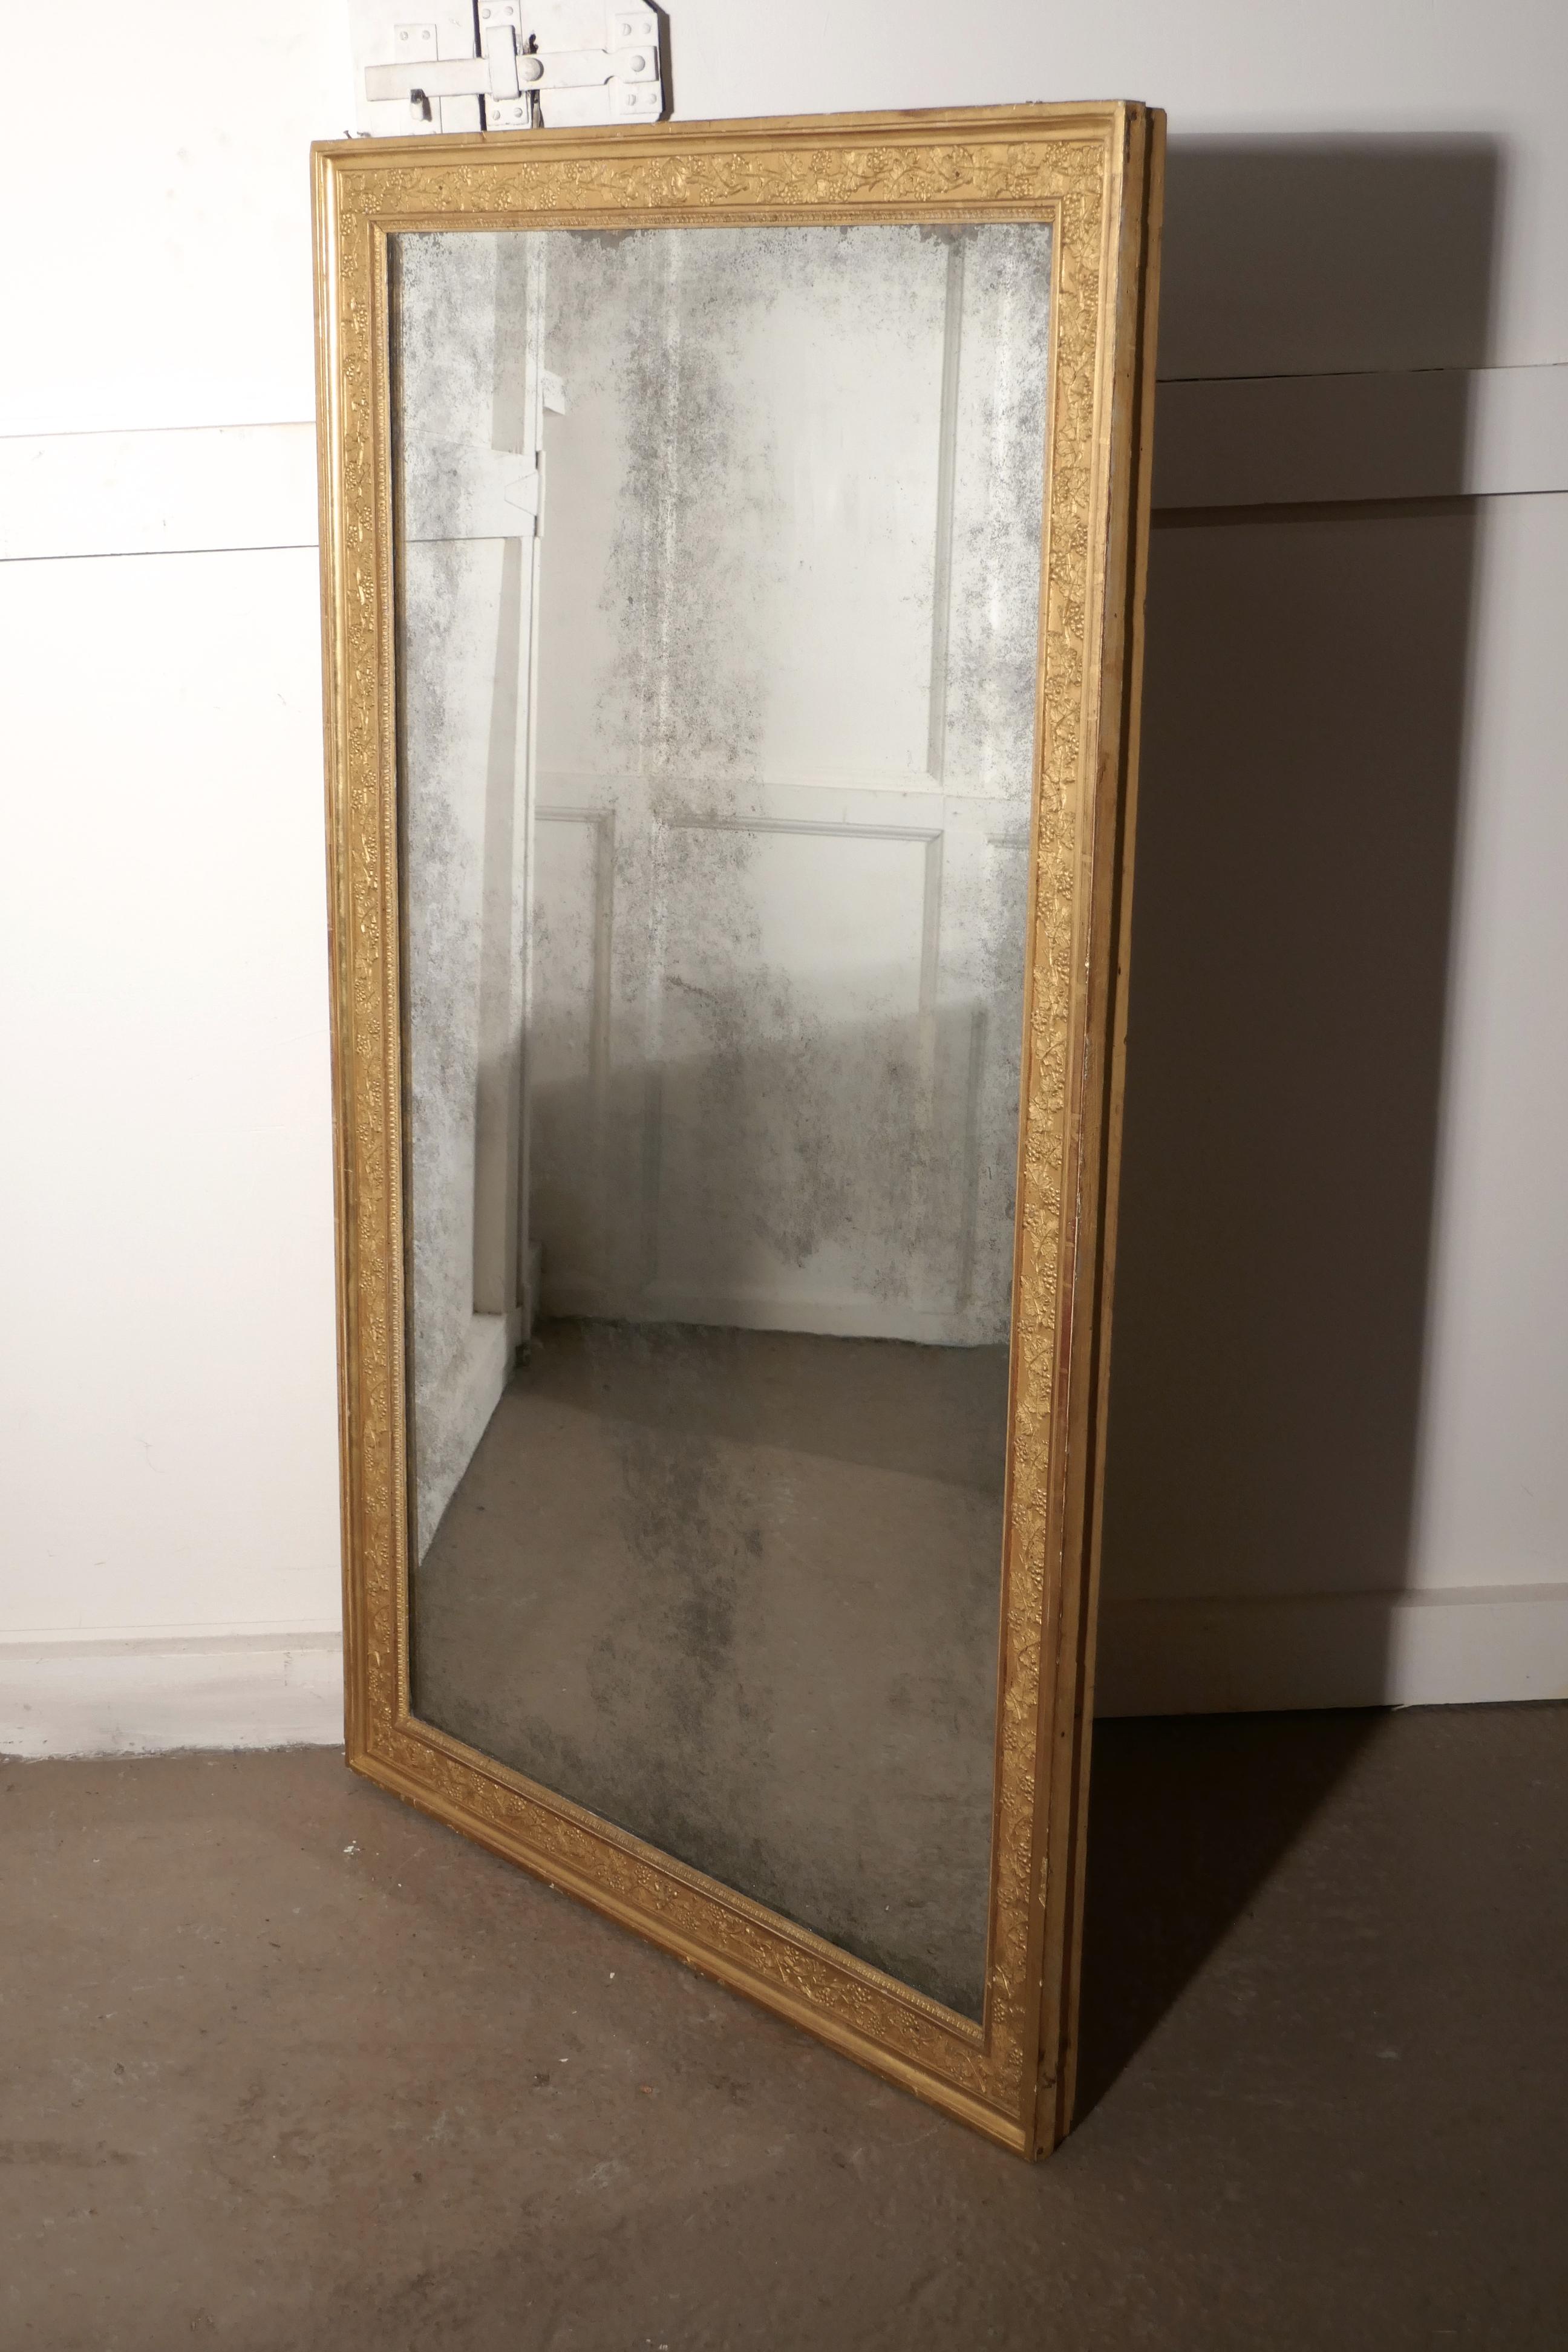 Large heavy French gold shabby wall mirror.

This is a charming piece of shabby elegance, the aged gold mirror frame is 3” wide and carved with grapes and vines carved all the way around with the exception of one little bit at the top where we can